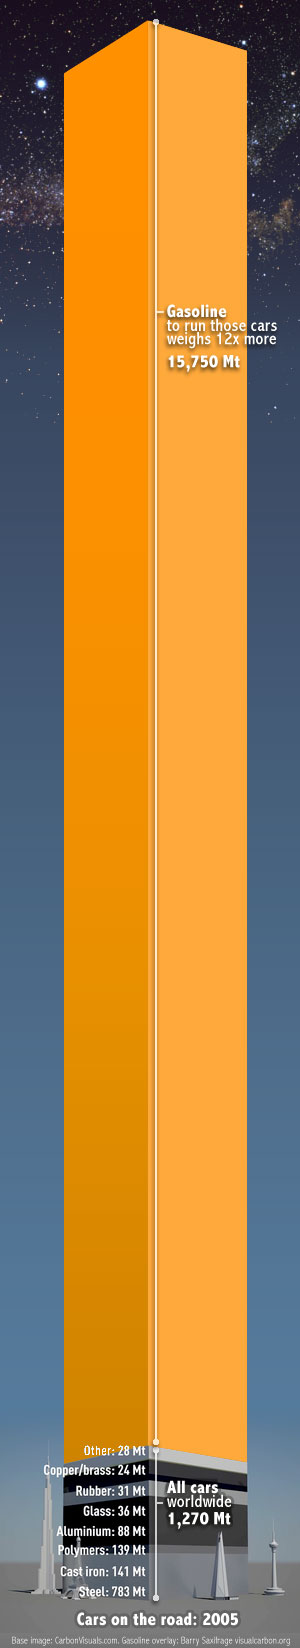 Same image with gasoline added on top in orange